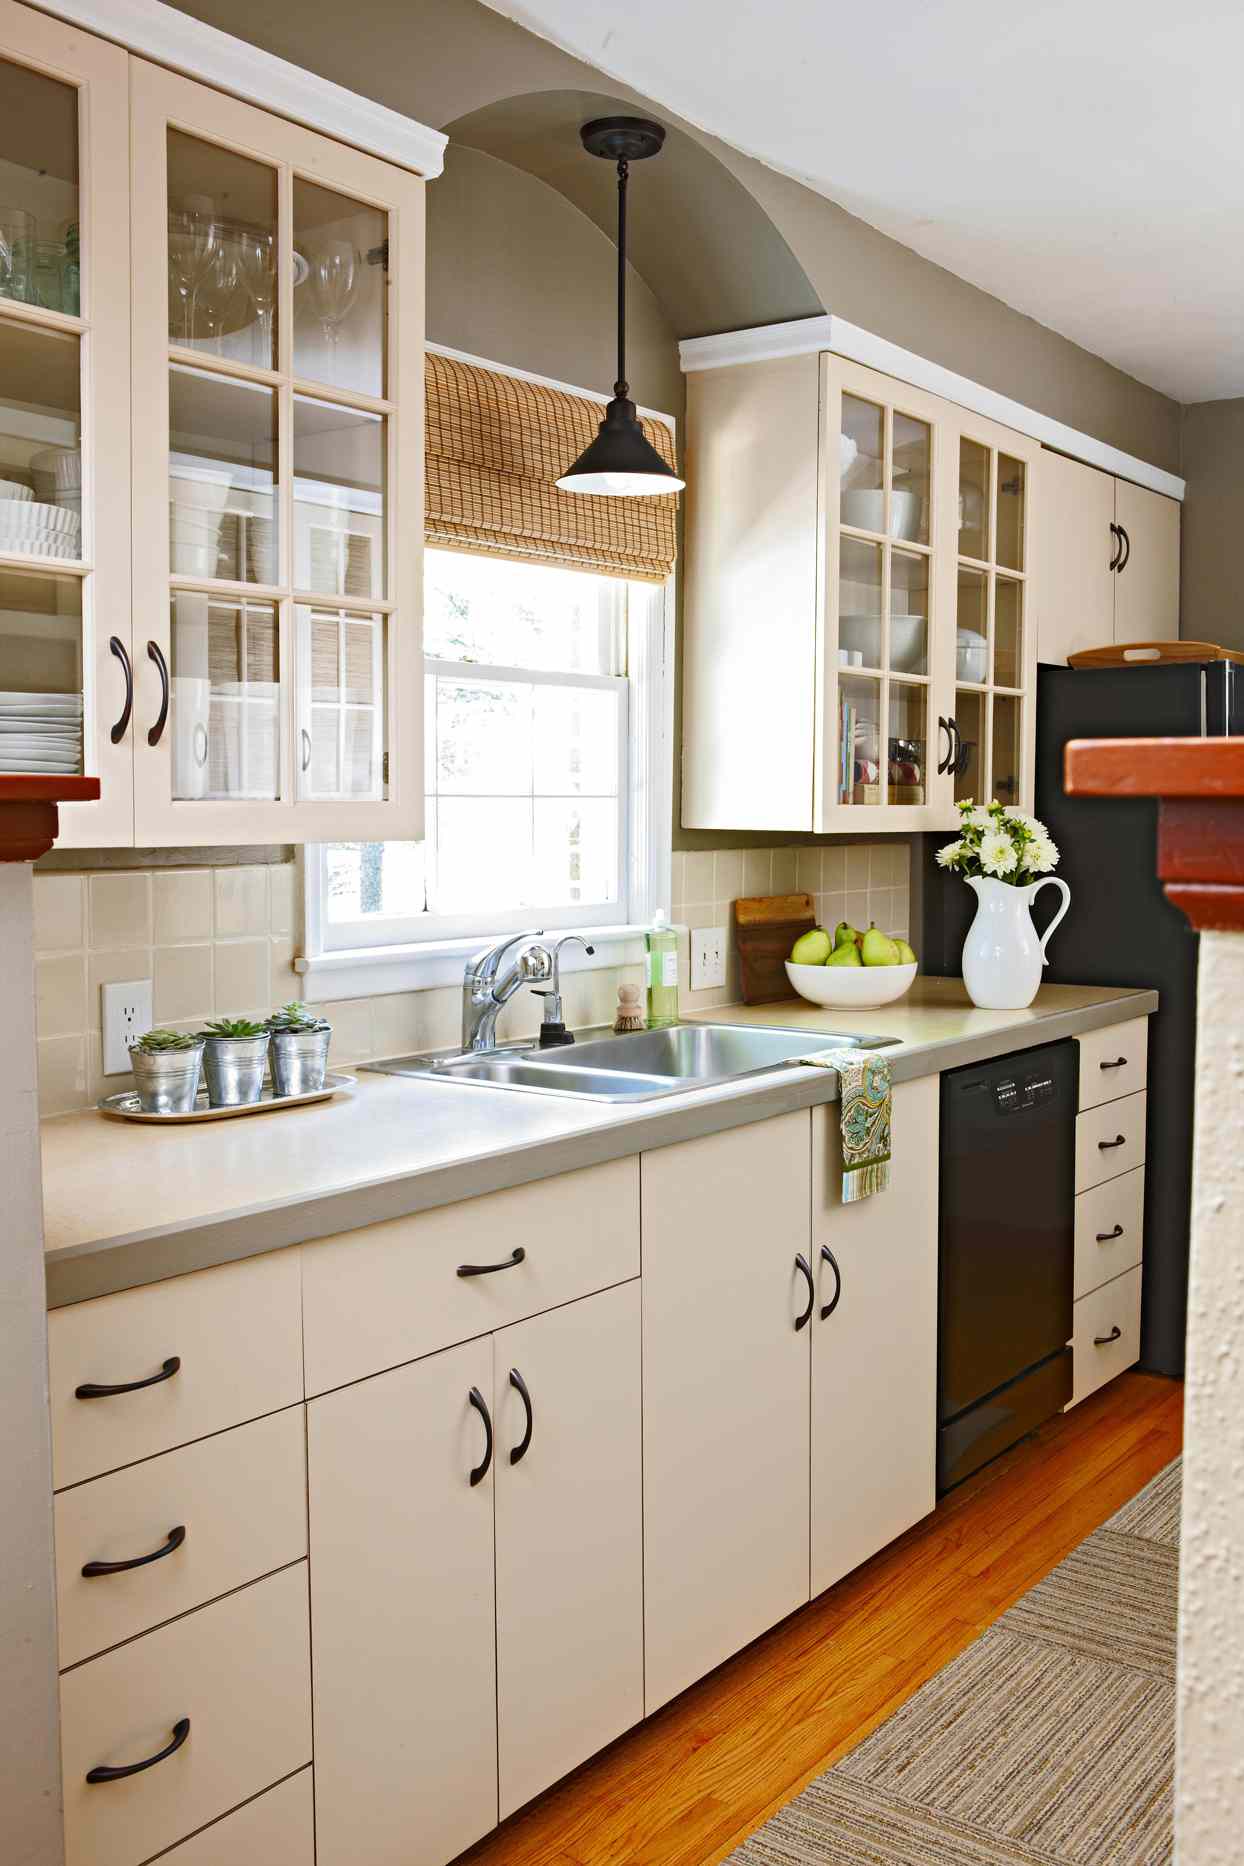 Low Cost DIY Kitchen Remodel Ideas Will Update Your Style and ...